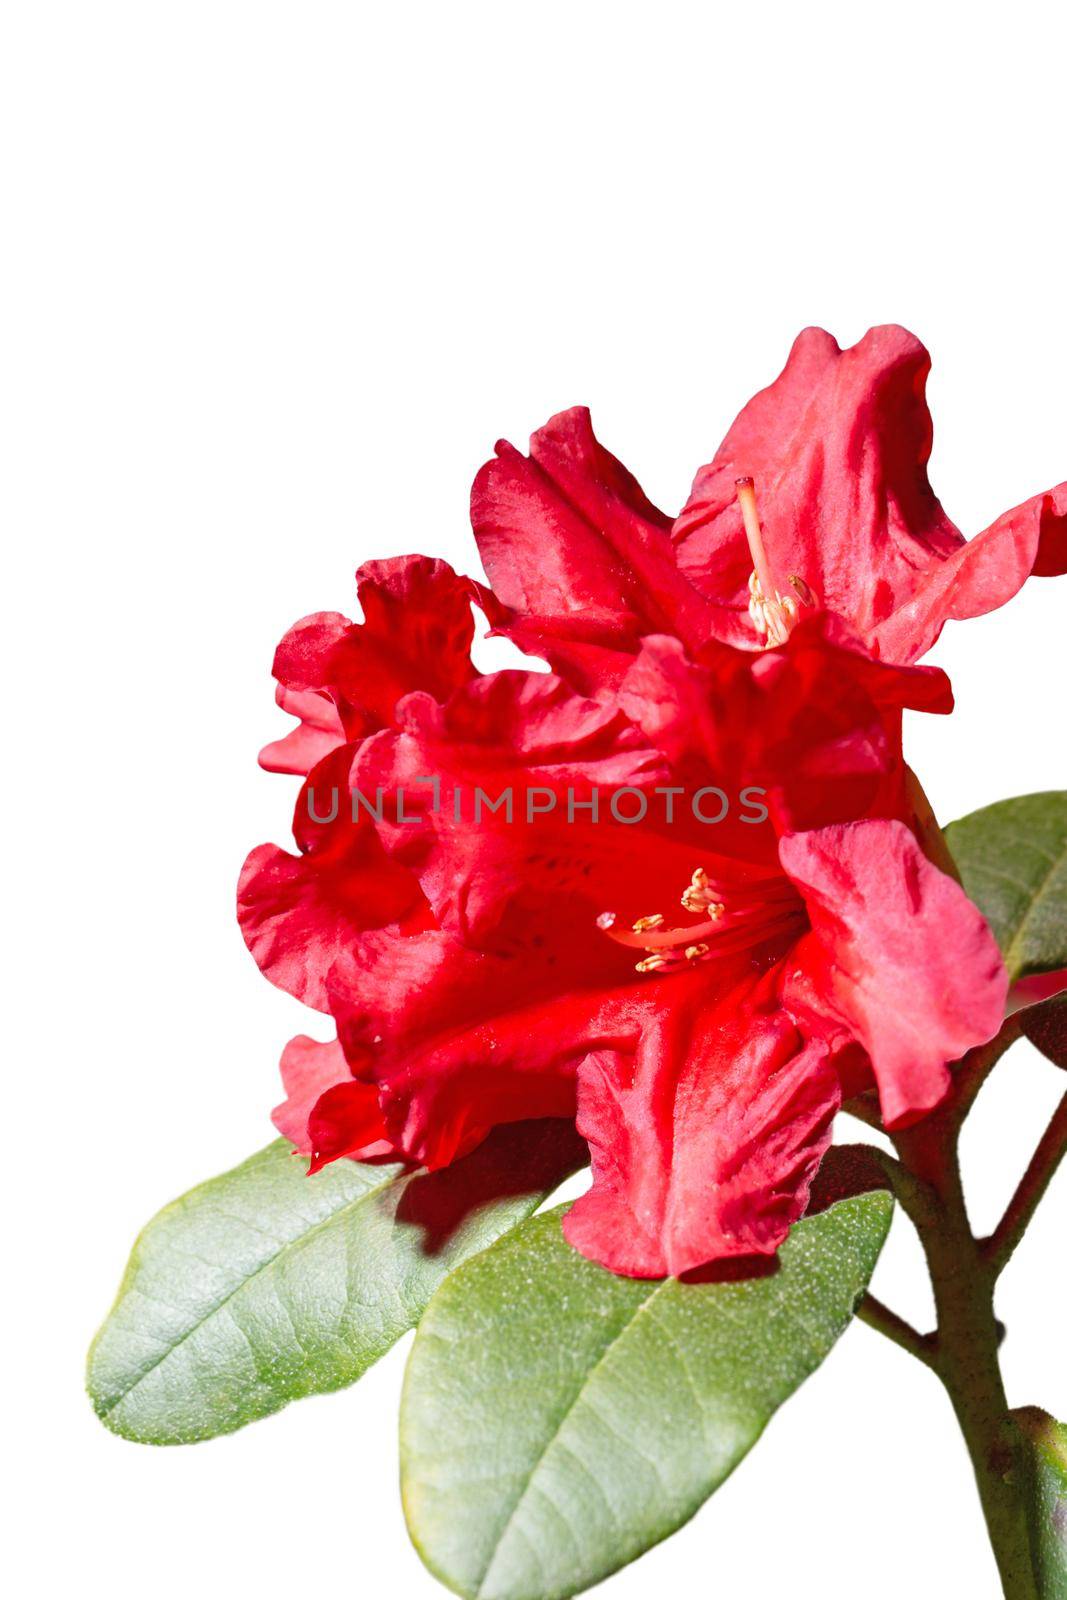 Crimson red rhododendron flower isolated on white background by clusterx